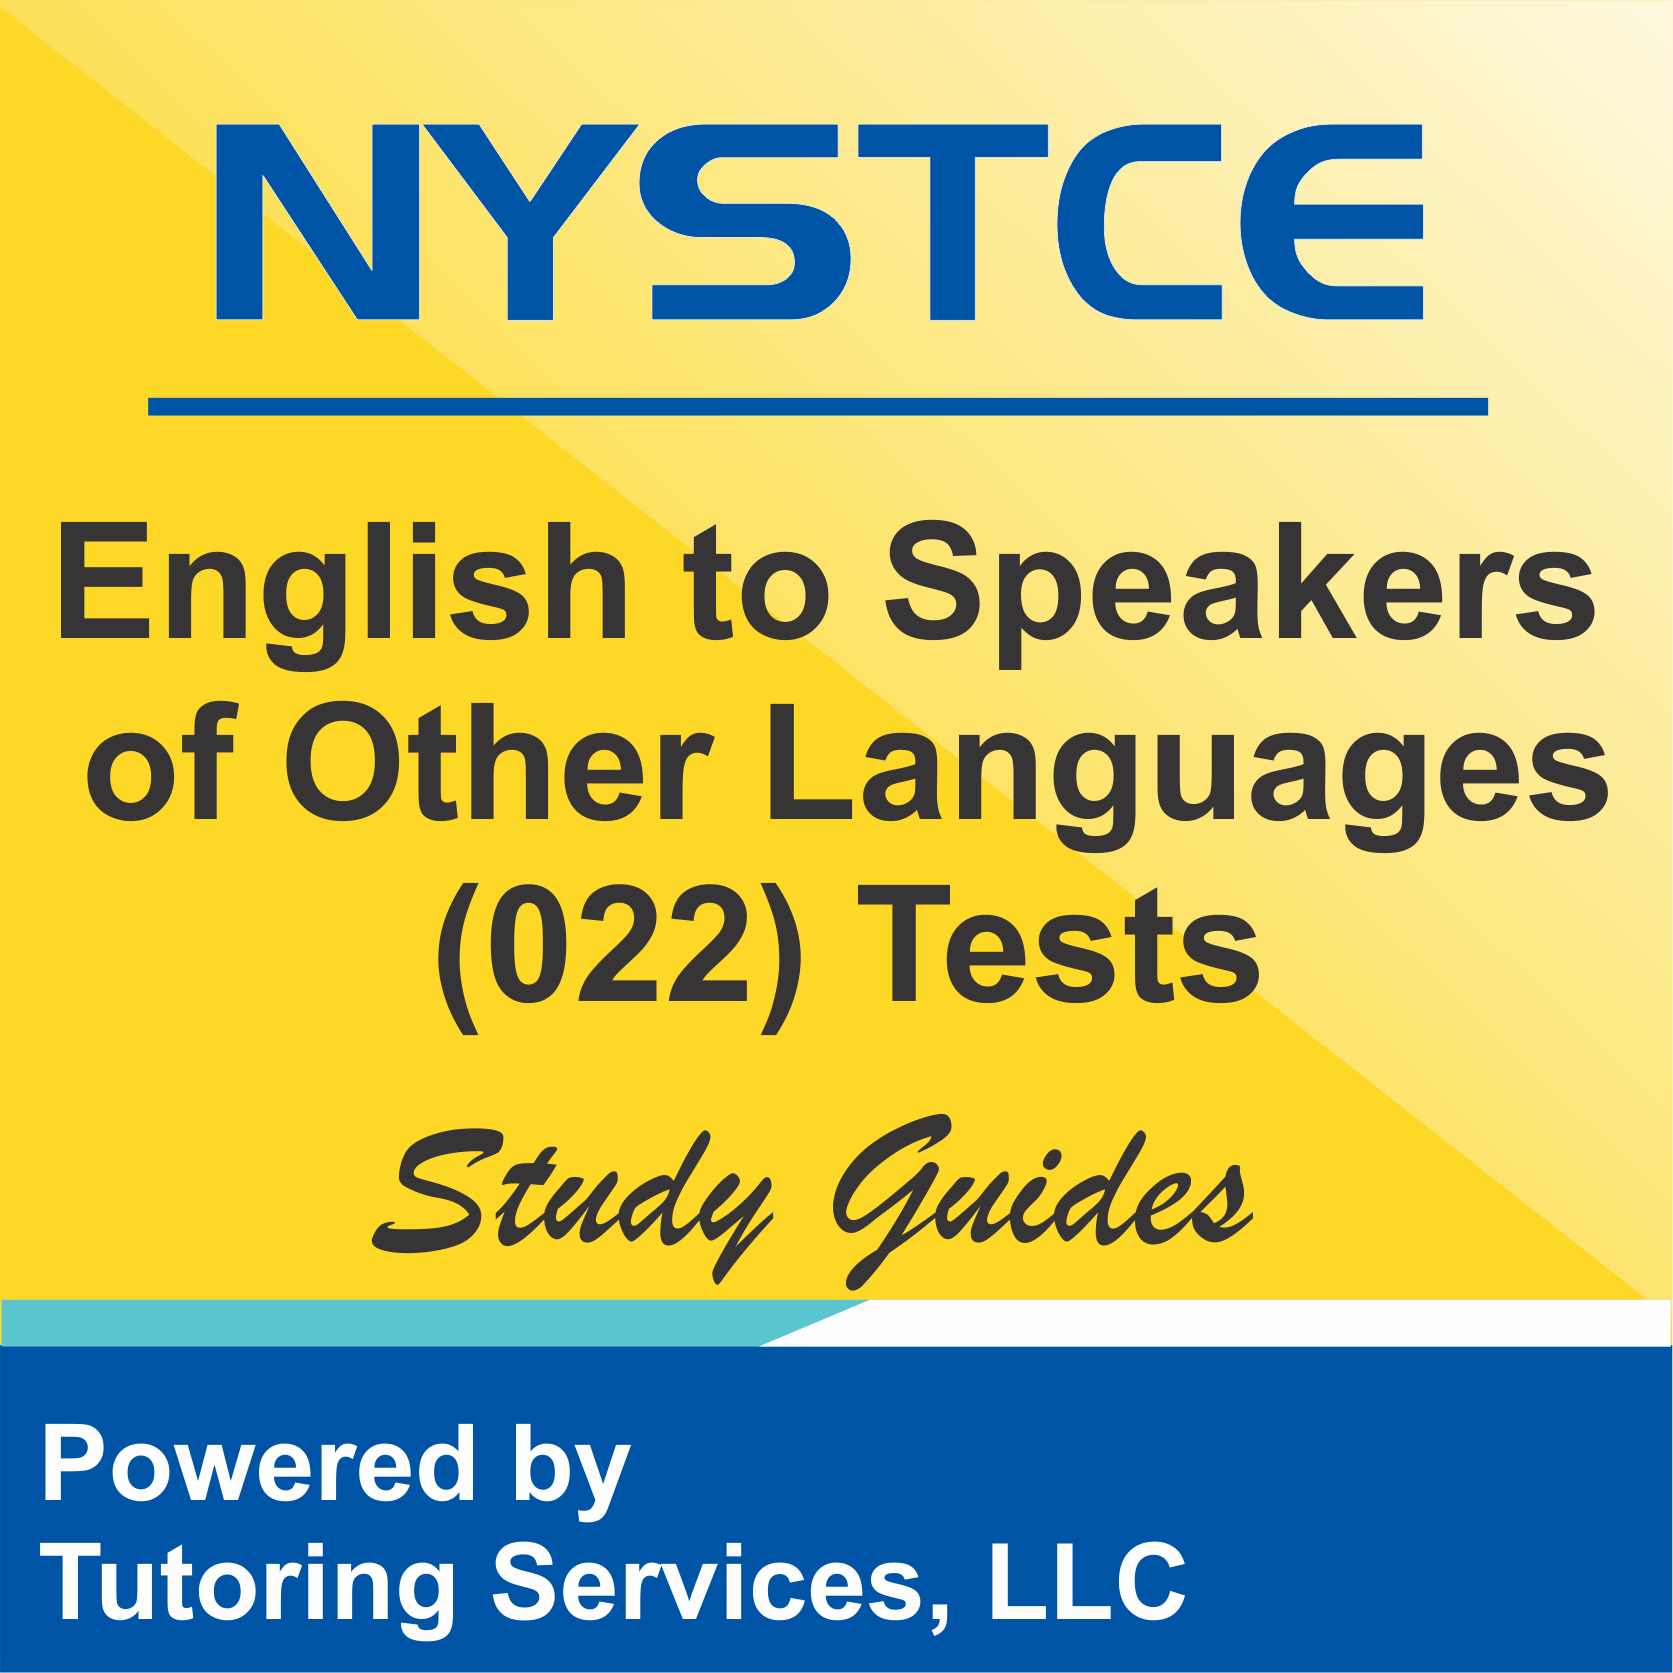 NYSTCE New York State Licensure Test Facts for English to Speakers of Other Languages 022